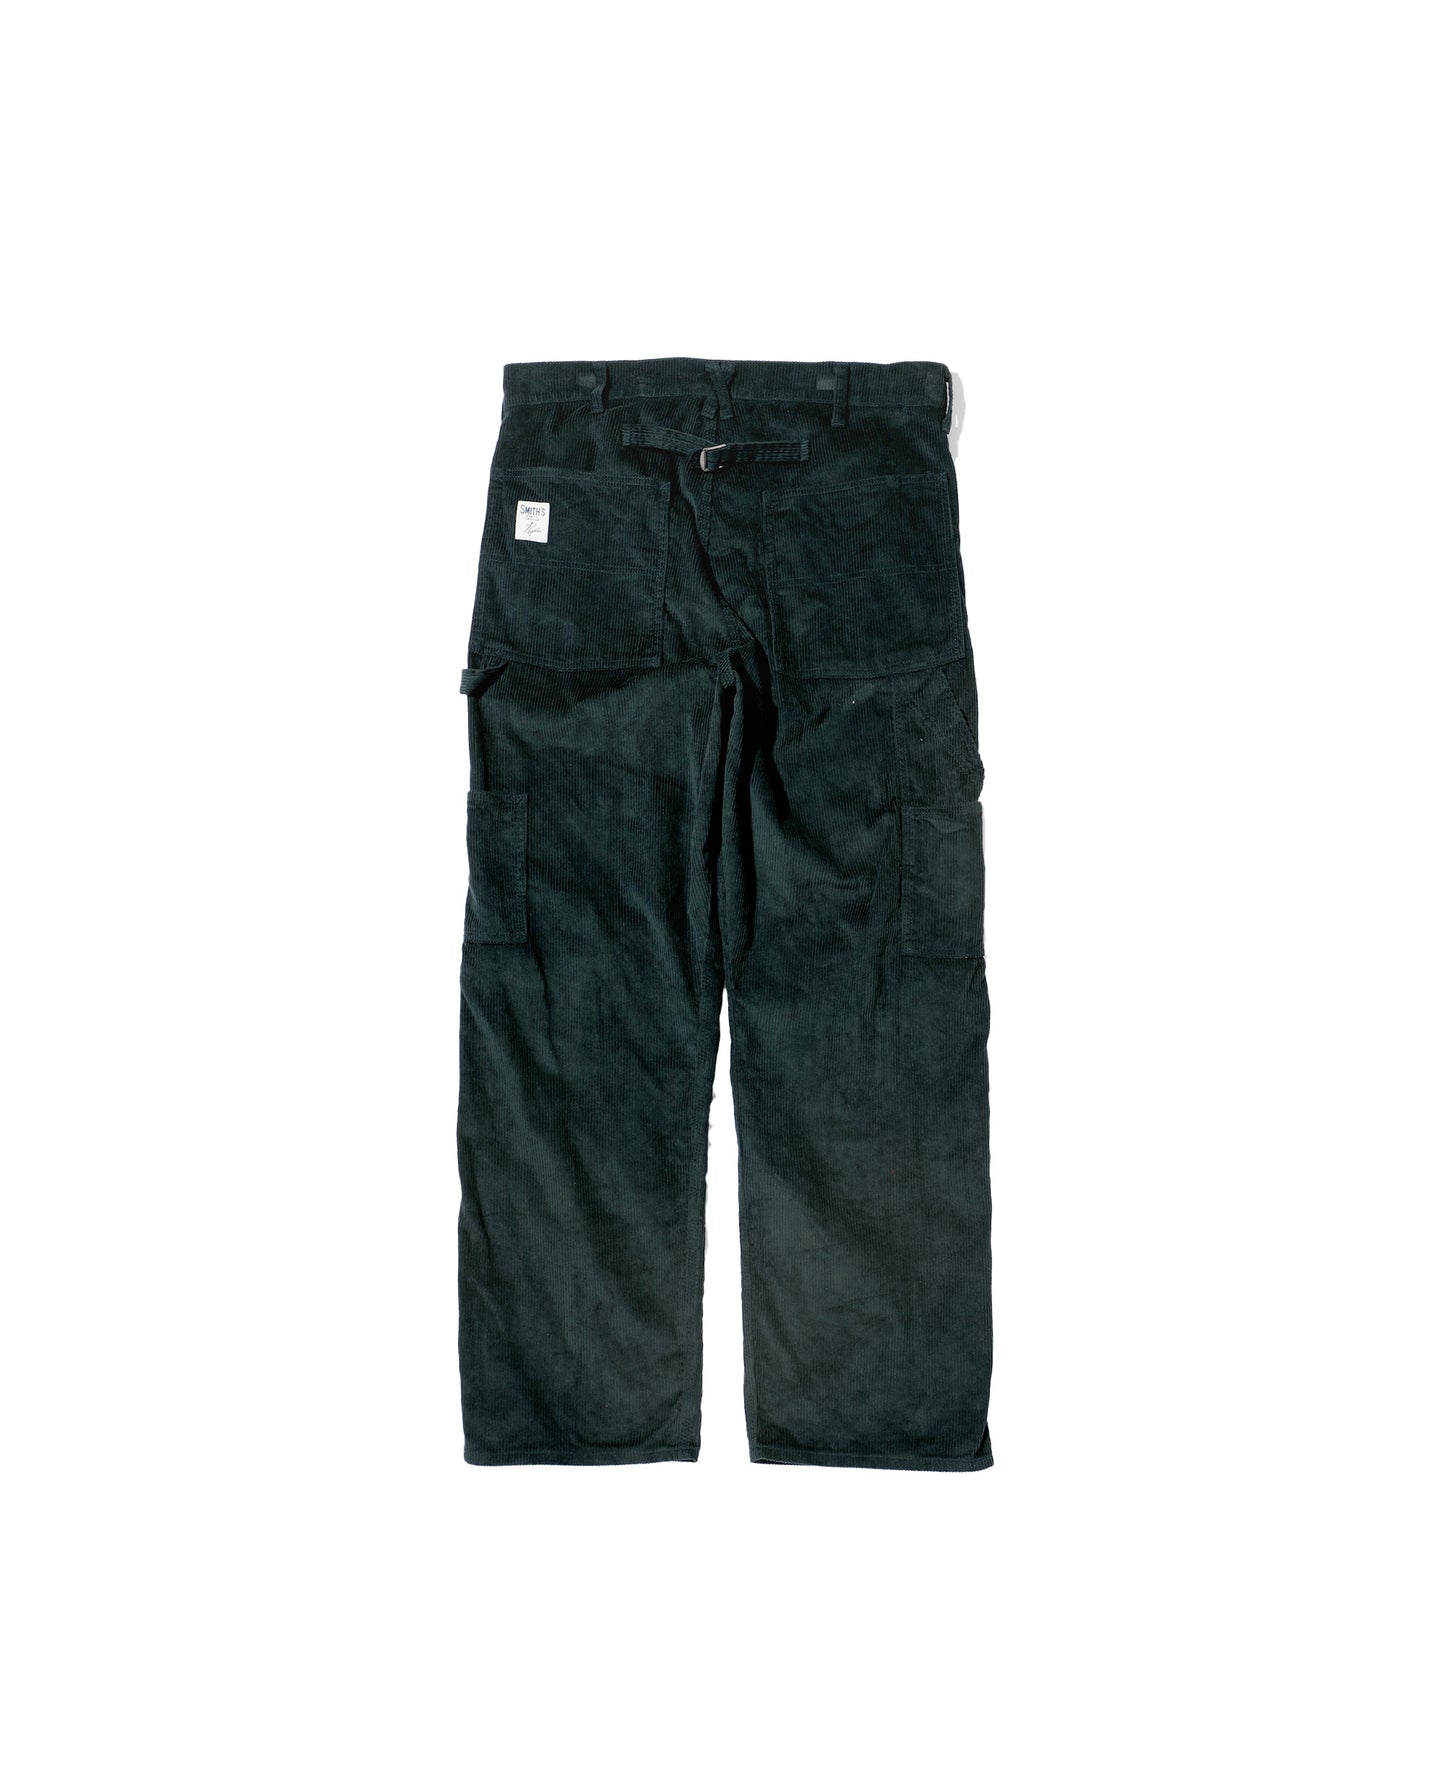 Stussy 8 Ball Applique Pant | STASHED